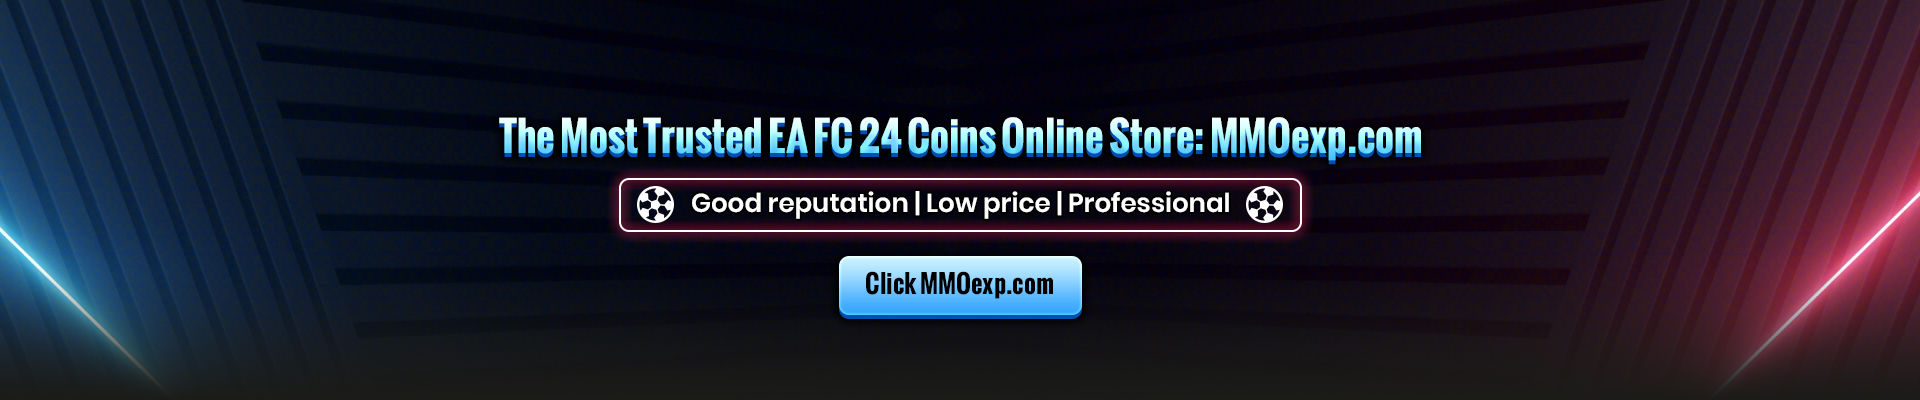 The Most Trusted EA FC 24 Coins Online Store: MMOe